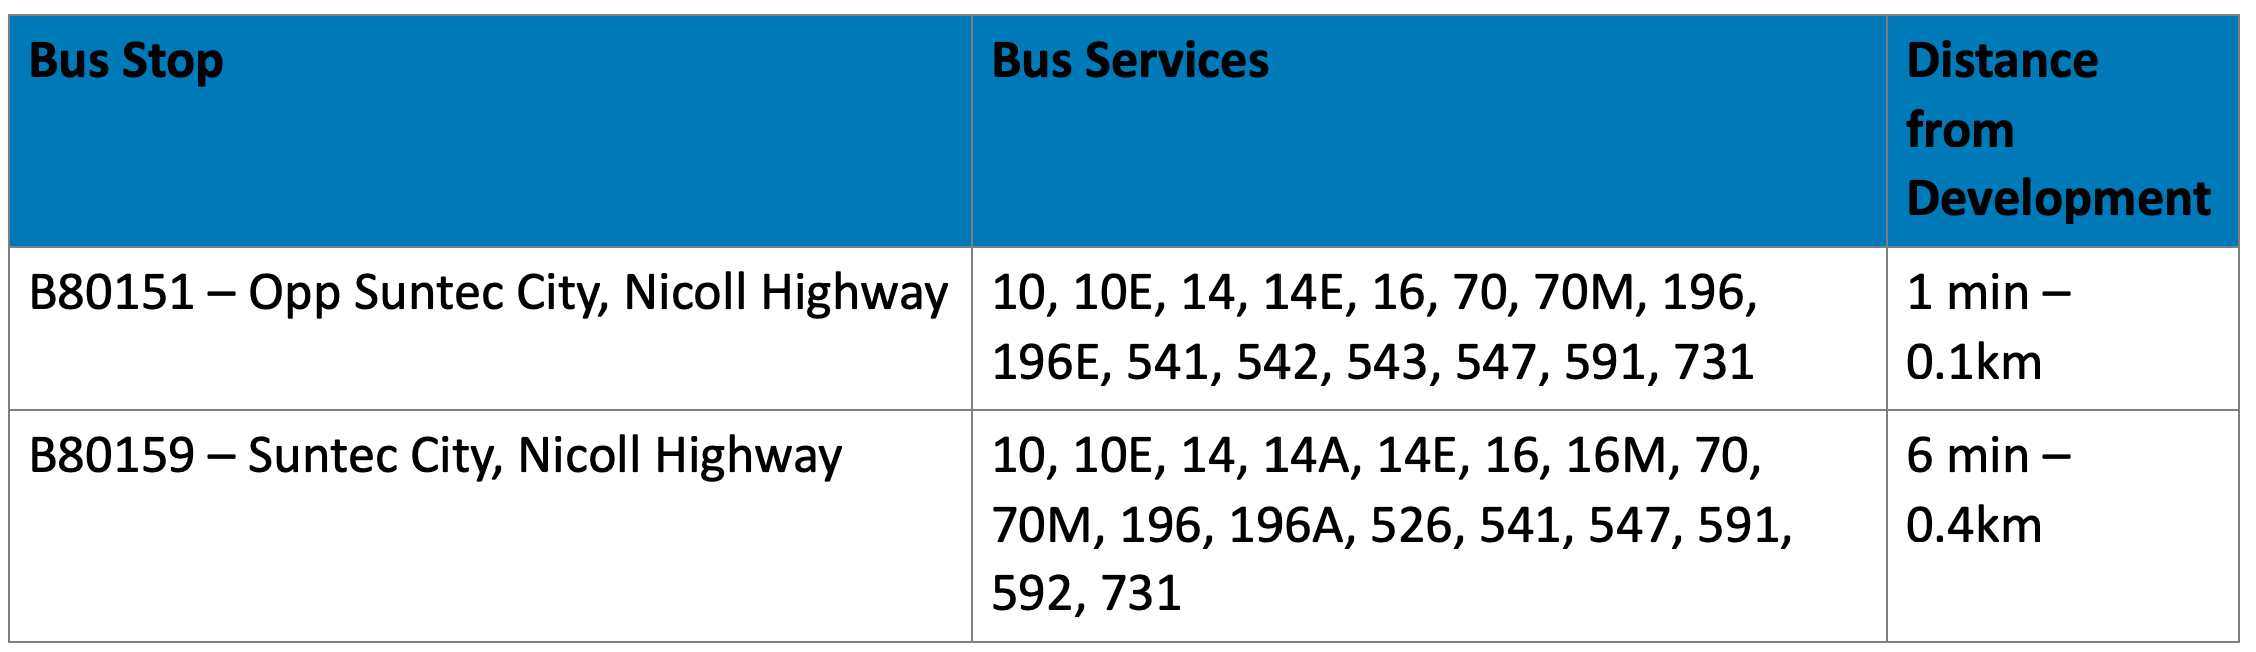 Midtown Bay Bus Accessibility PropertyLimBrothers.png